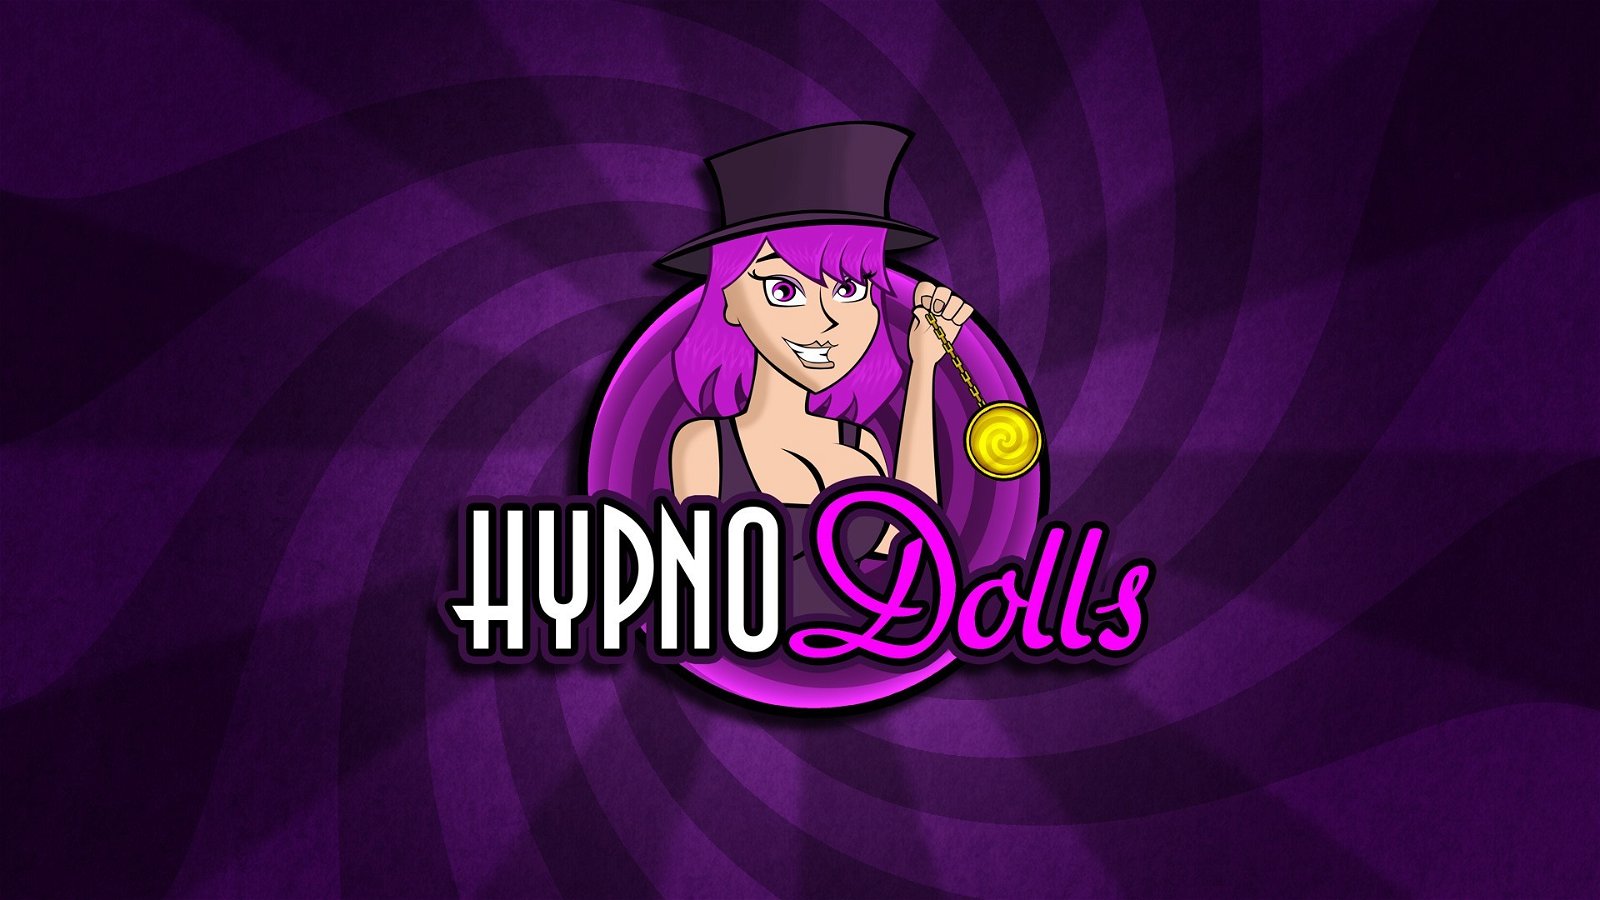 Watch the Photo by HypnoDolls with the username @HypnoDolls, posted on December 5, 2018